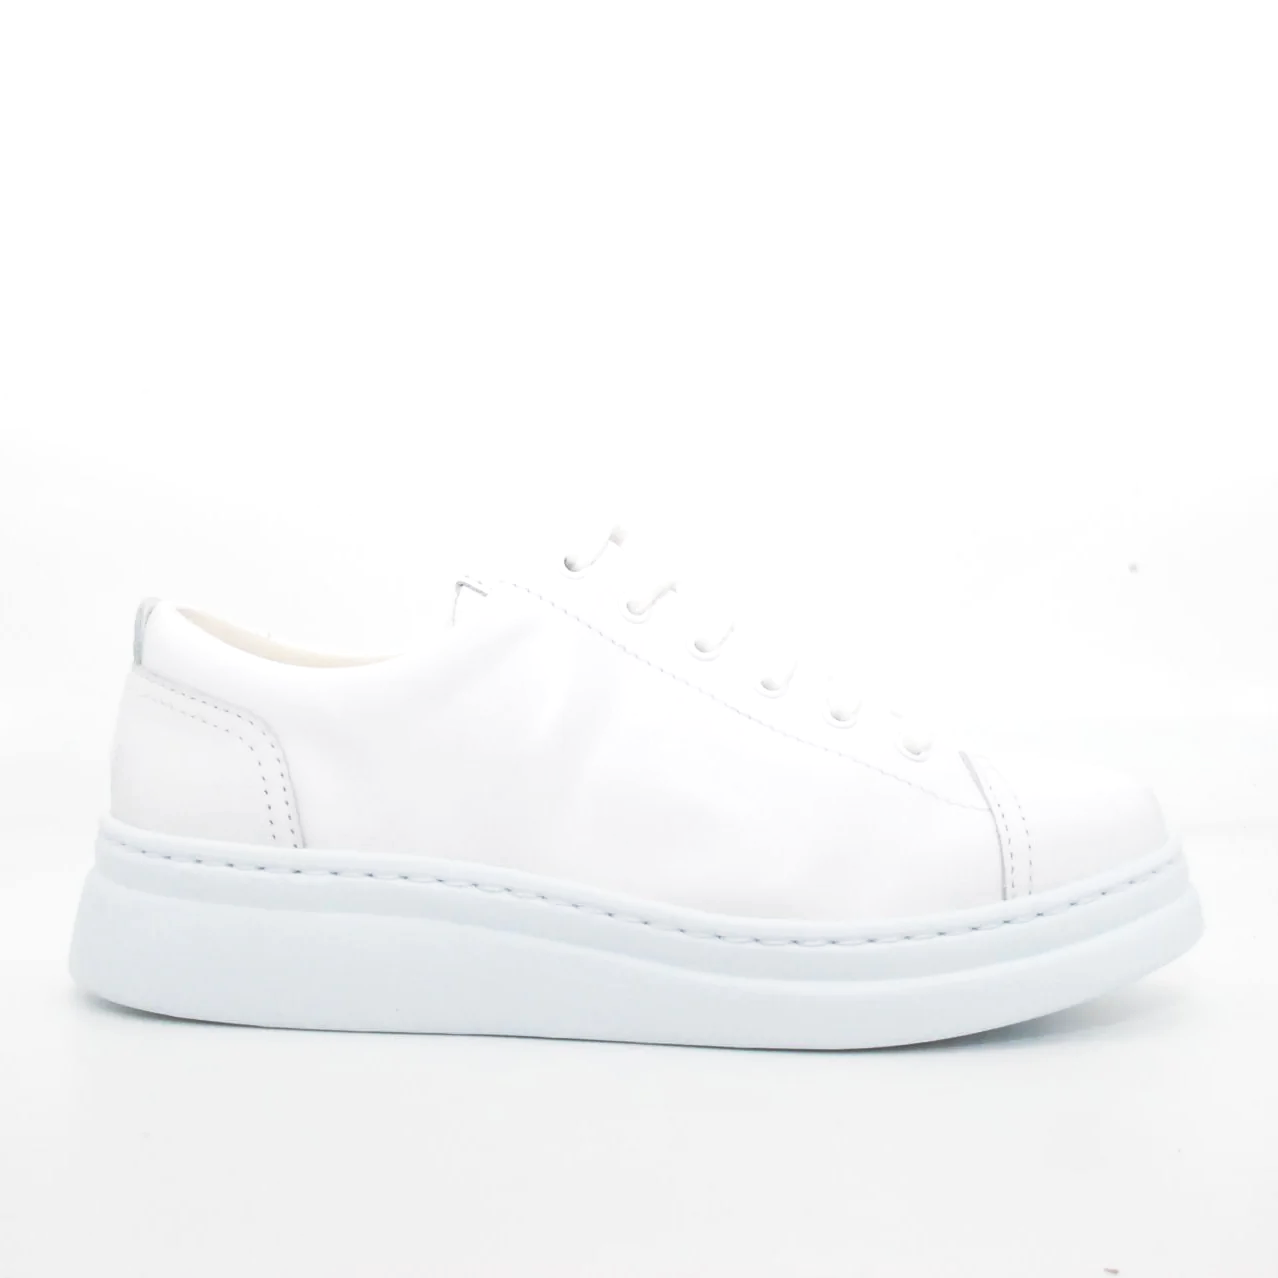 sneakers-camper-runner-up-in-pelle-35-bianco-pelle-sneakers_6d9a03e3-4091-457d-ae84-adc96aa74ada.png